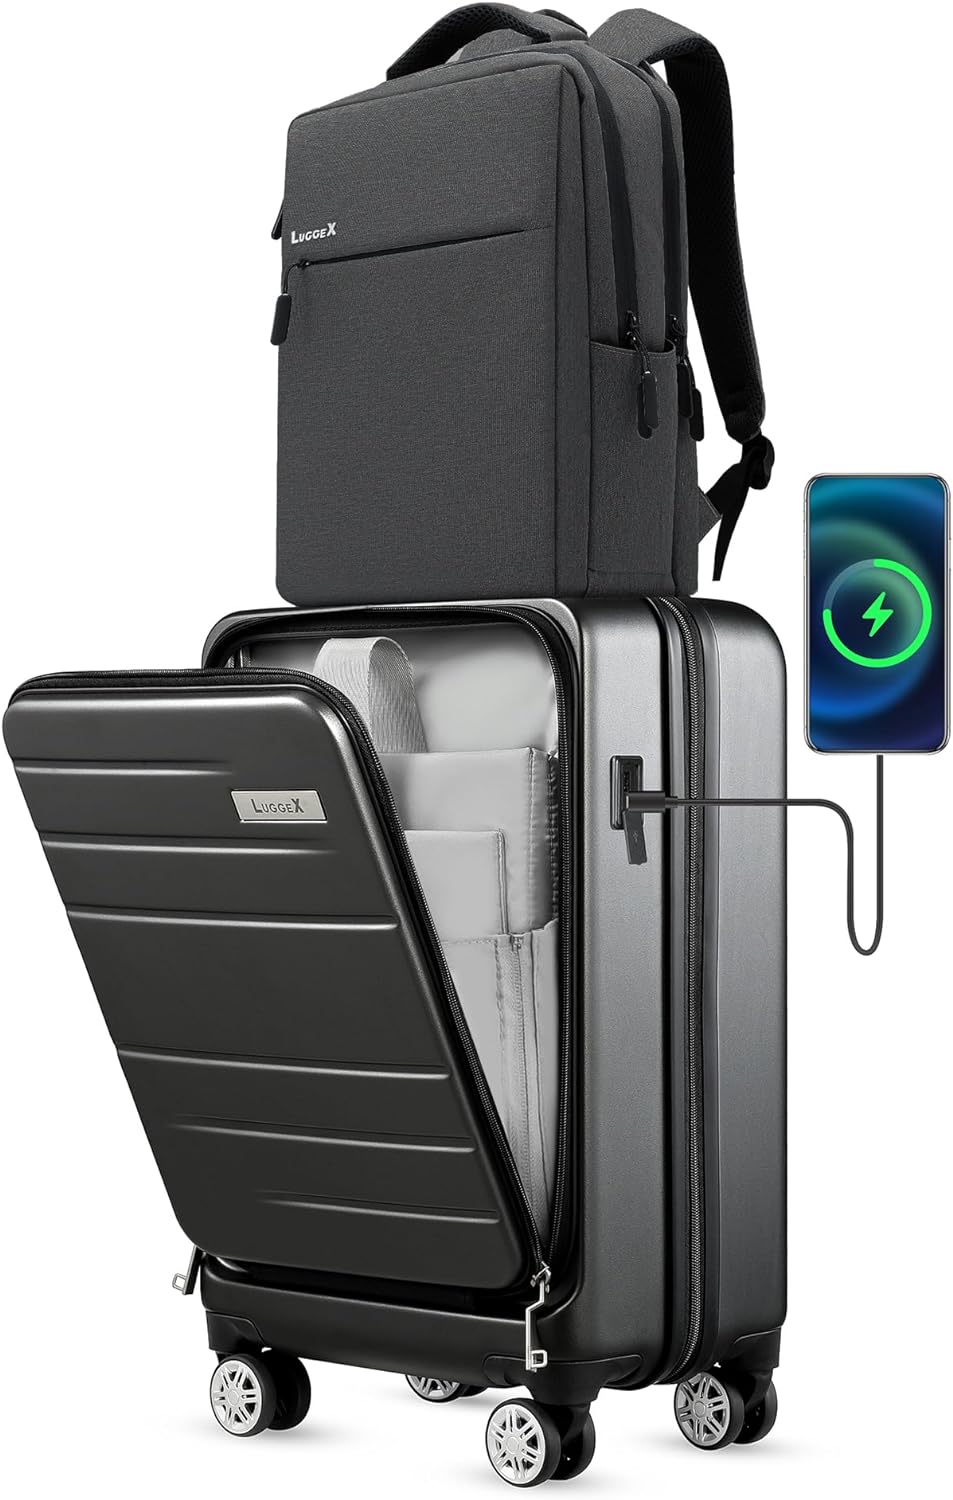 Read more about the article LUGGEX Carry On Luggage with Backpack – Polycarbonate Hard Shell Suitcase with Pocket Compartment & USB Port for ONLY $89.99 (Was $129.99)